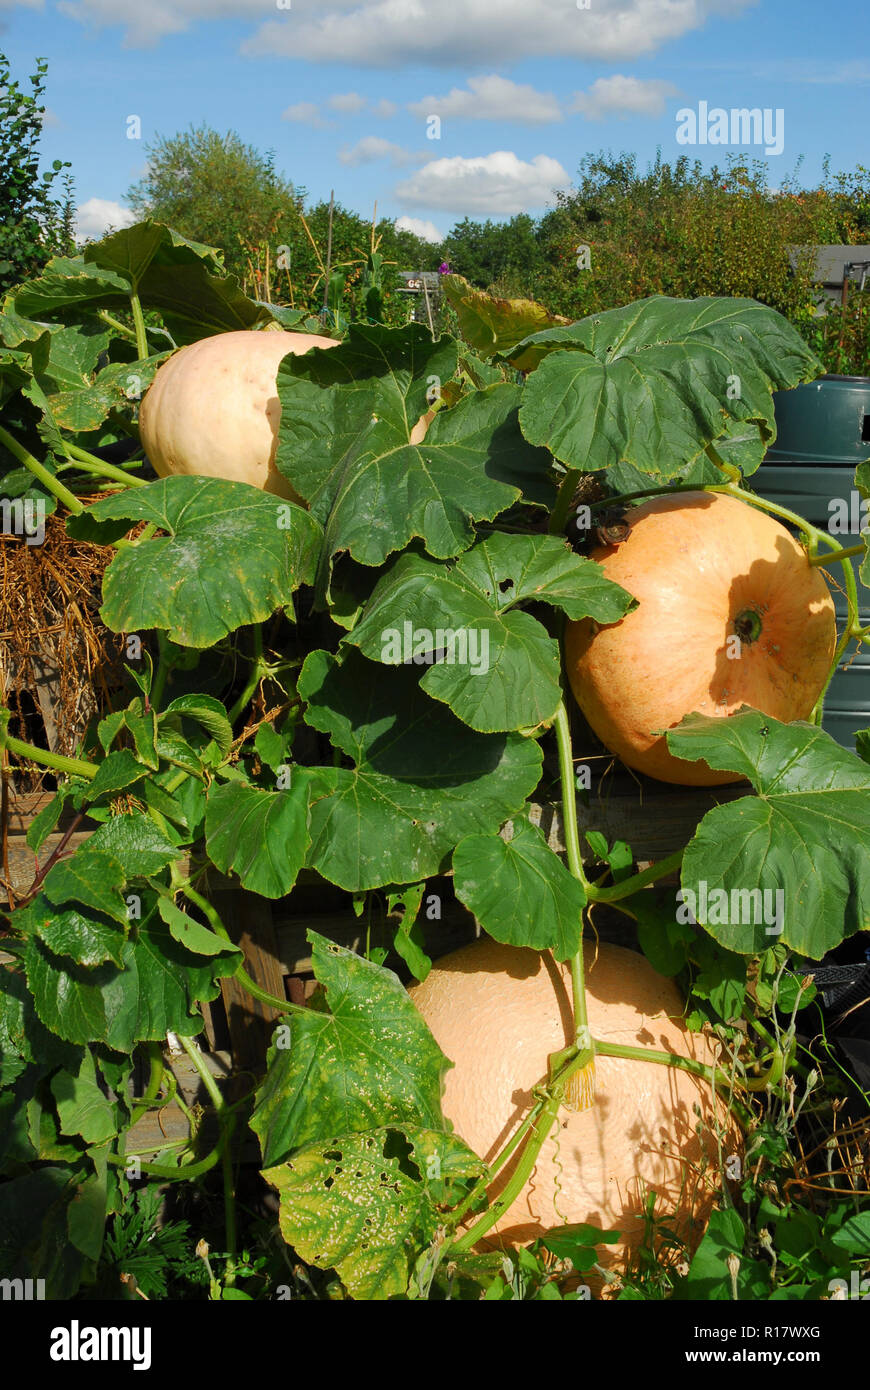 Three large light orange pumpkins 'Hundredweight' cascading from a compost heap with verdant foliage, with sunshine and bright blue skies. Stock Photo